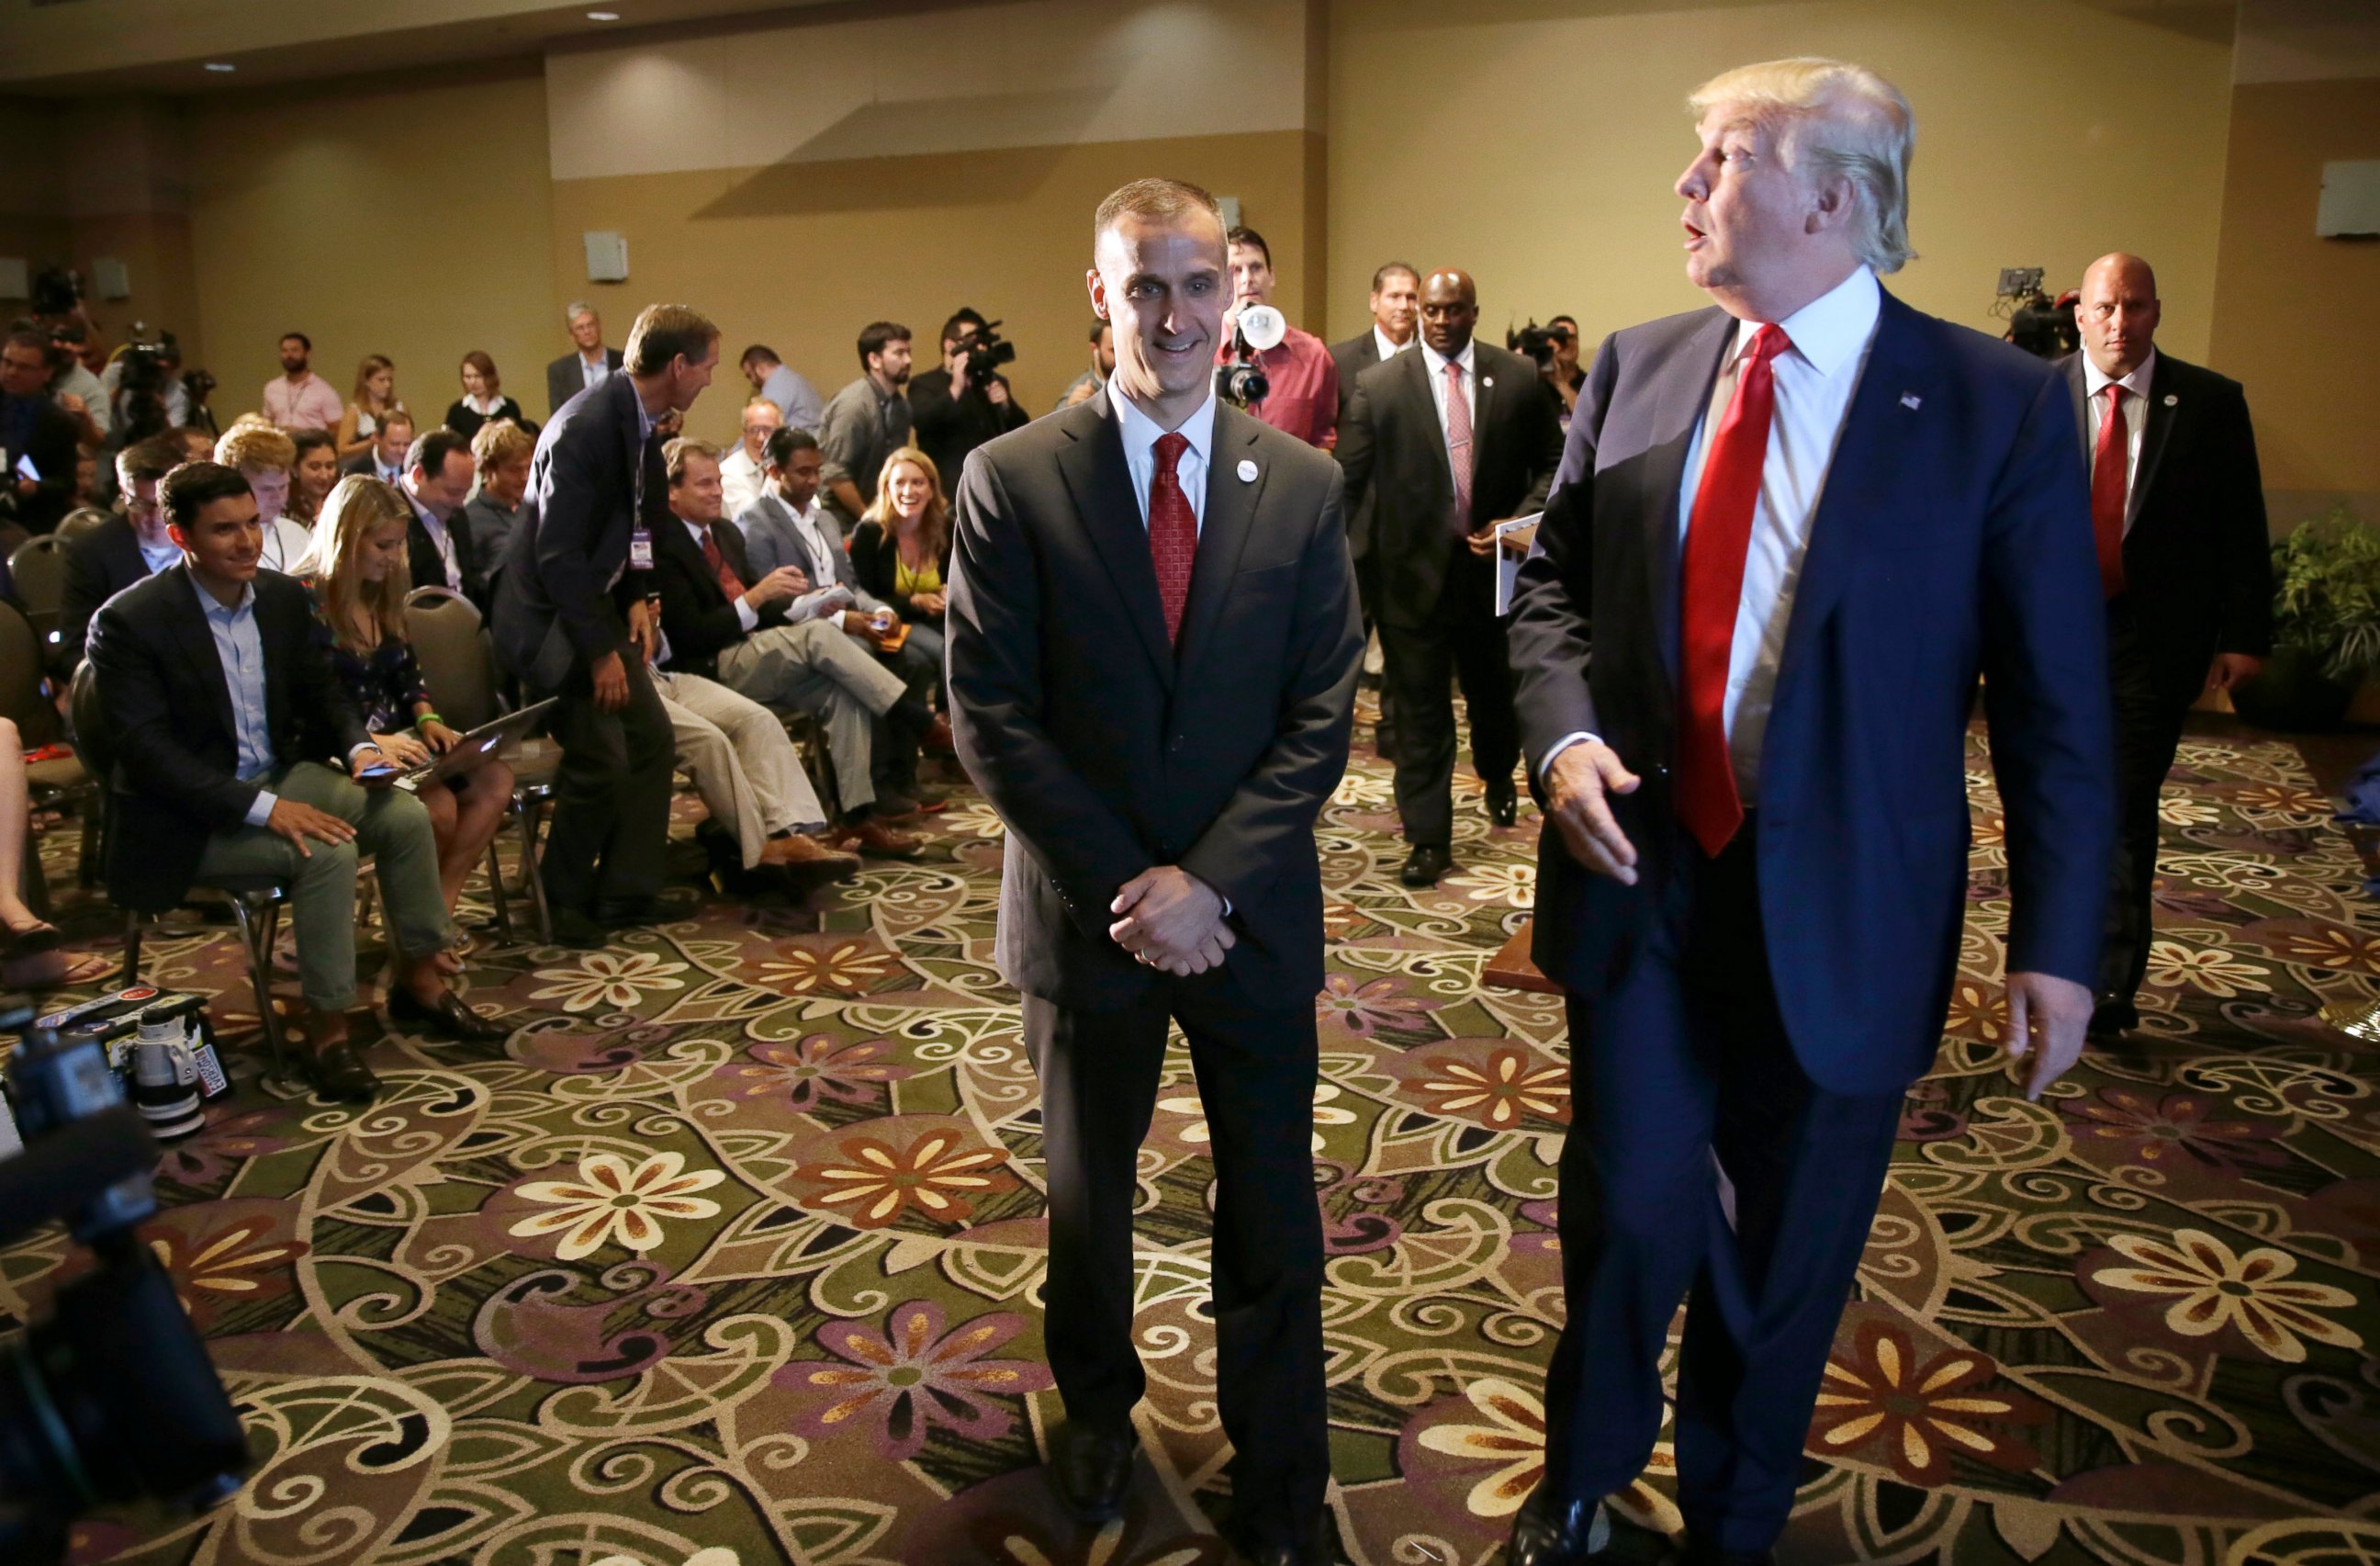 PHOTO: Donald Trump walks with his campaign manager Corey Lewandowski, left, after speaking at a news conference, Aug. 25, 2015, in Dubuque, Iowa.